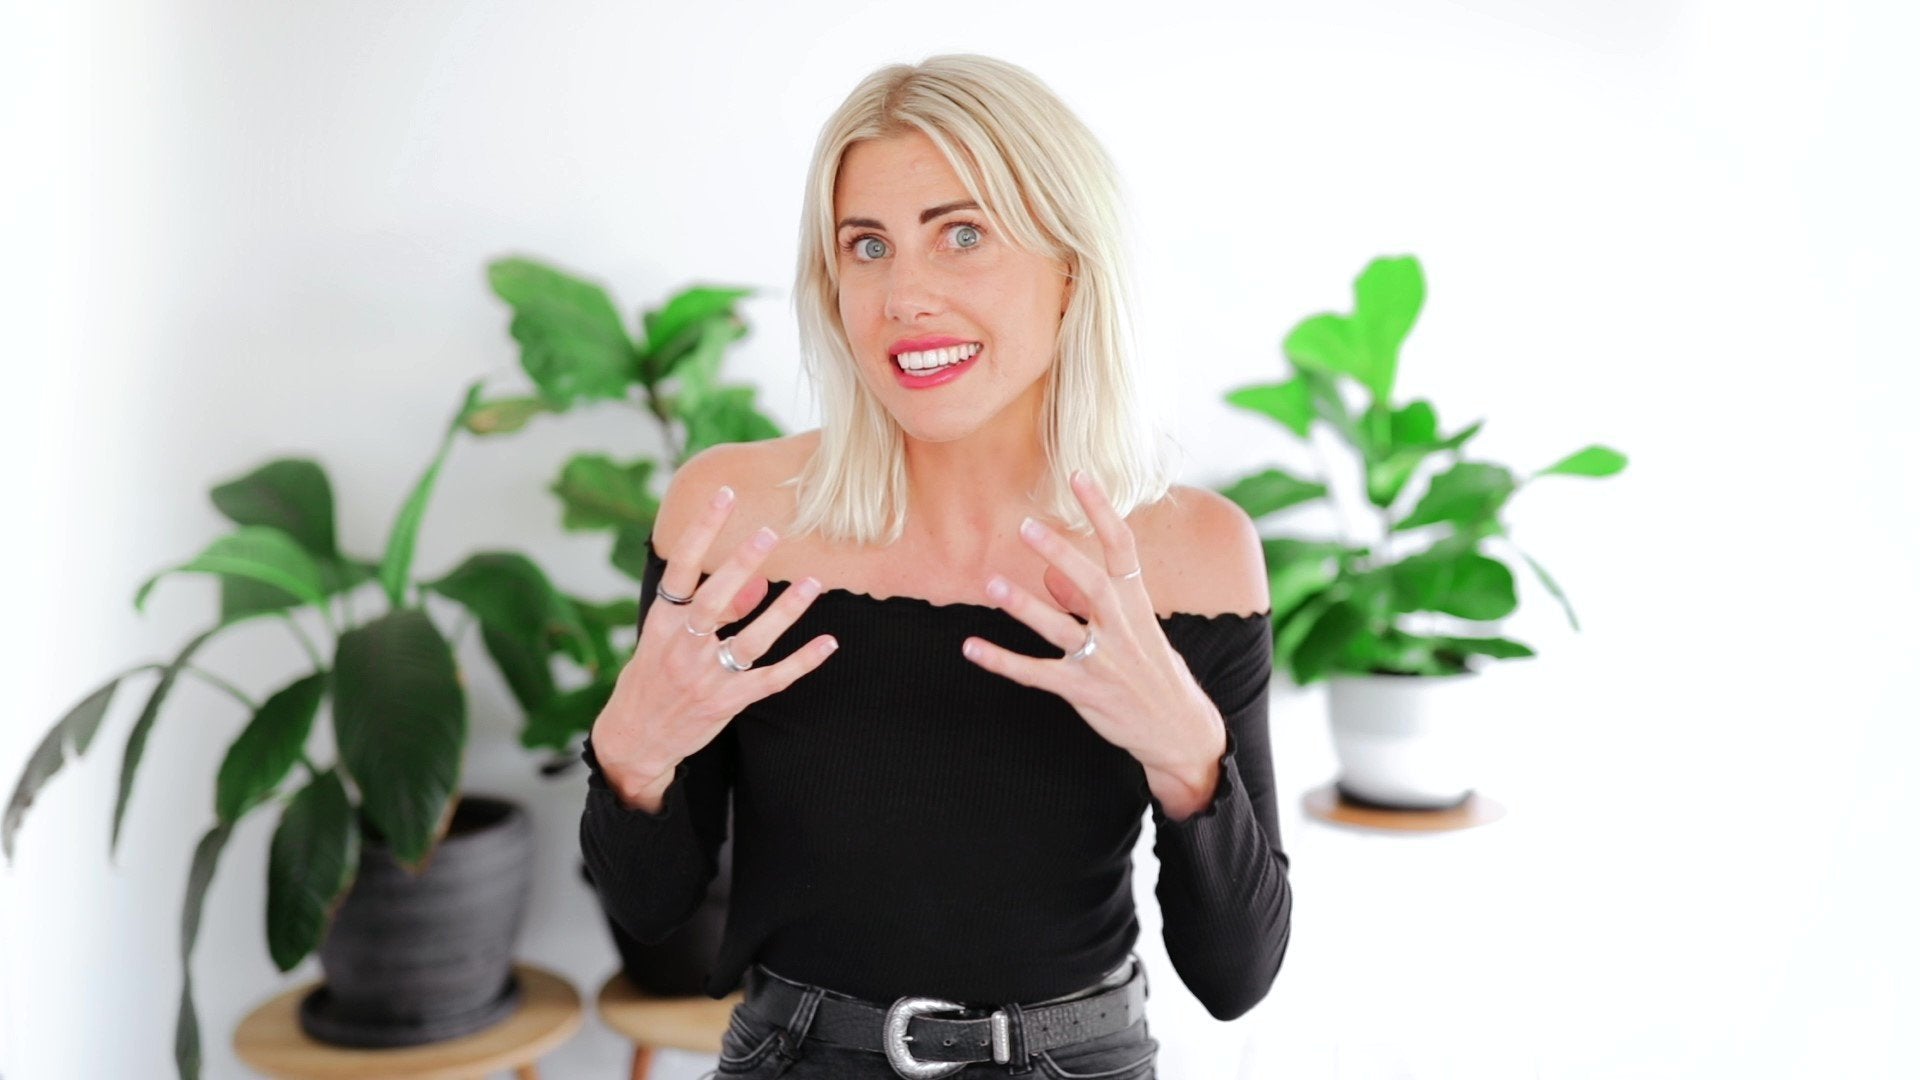 Watch: Why Your Outer Health Is Actually An Inside Job: What Is The Connection Between Your Skin And Your Gut?